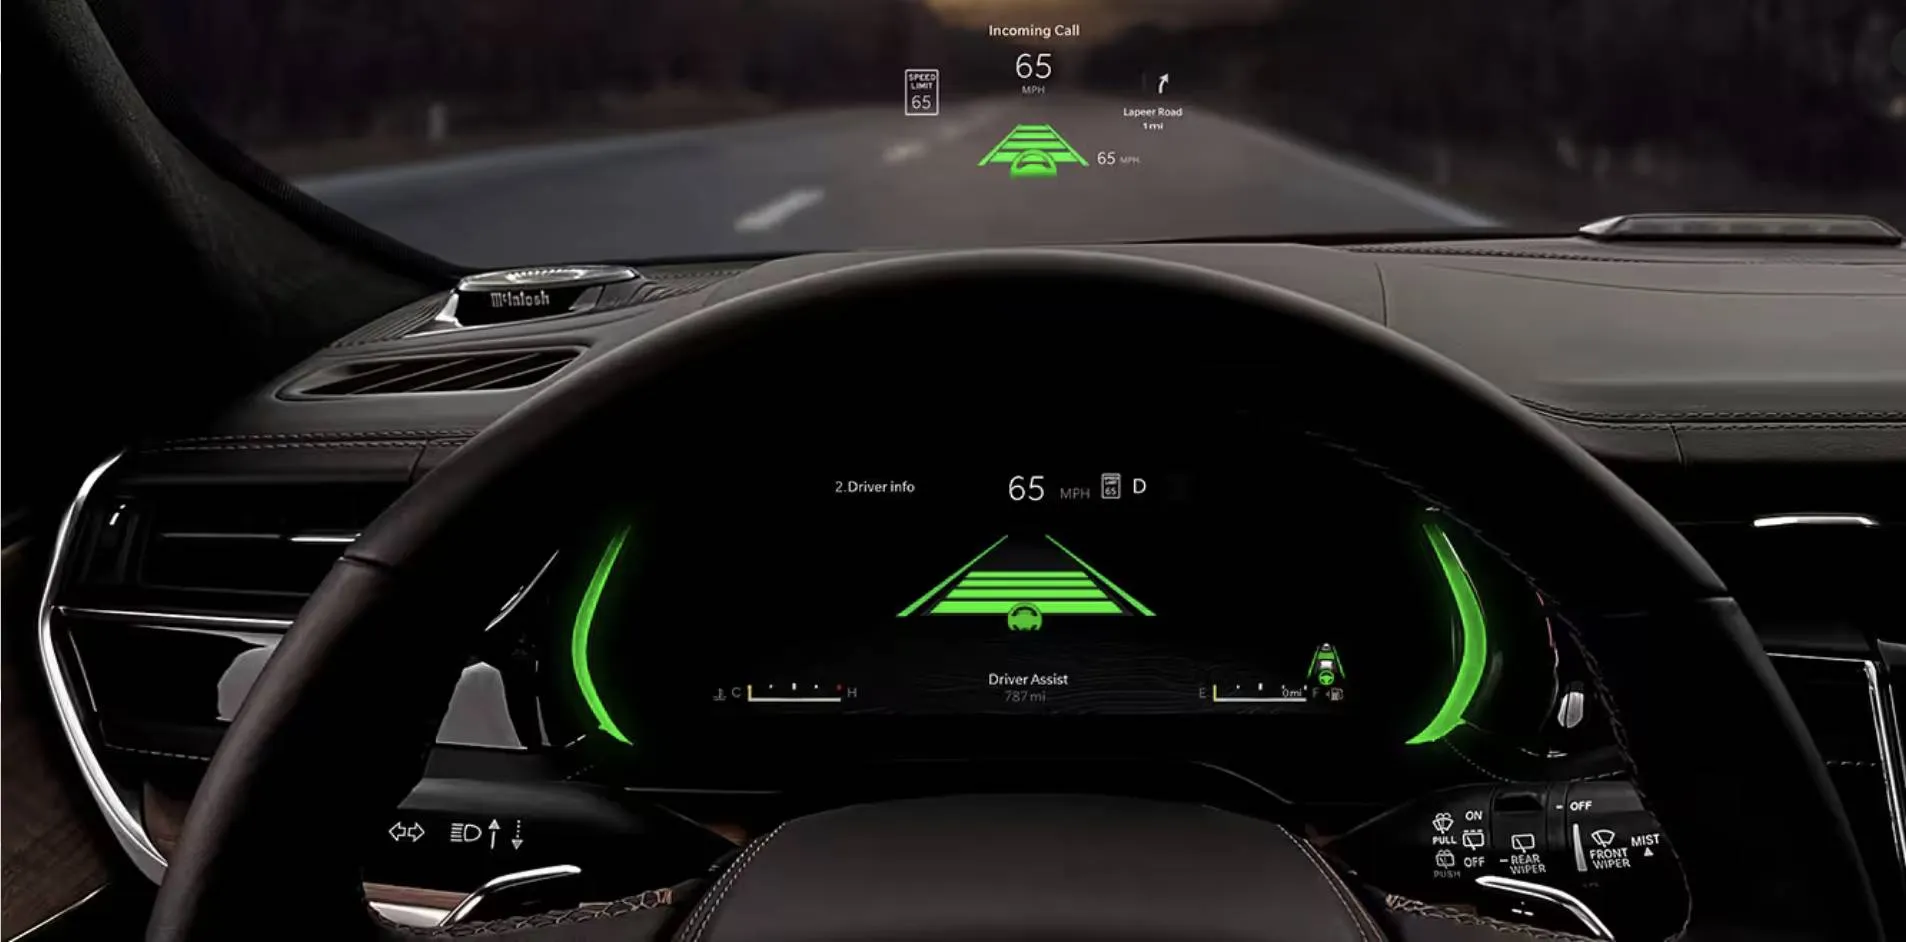 Stellantis quietly launched its hands-free driver-assist system